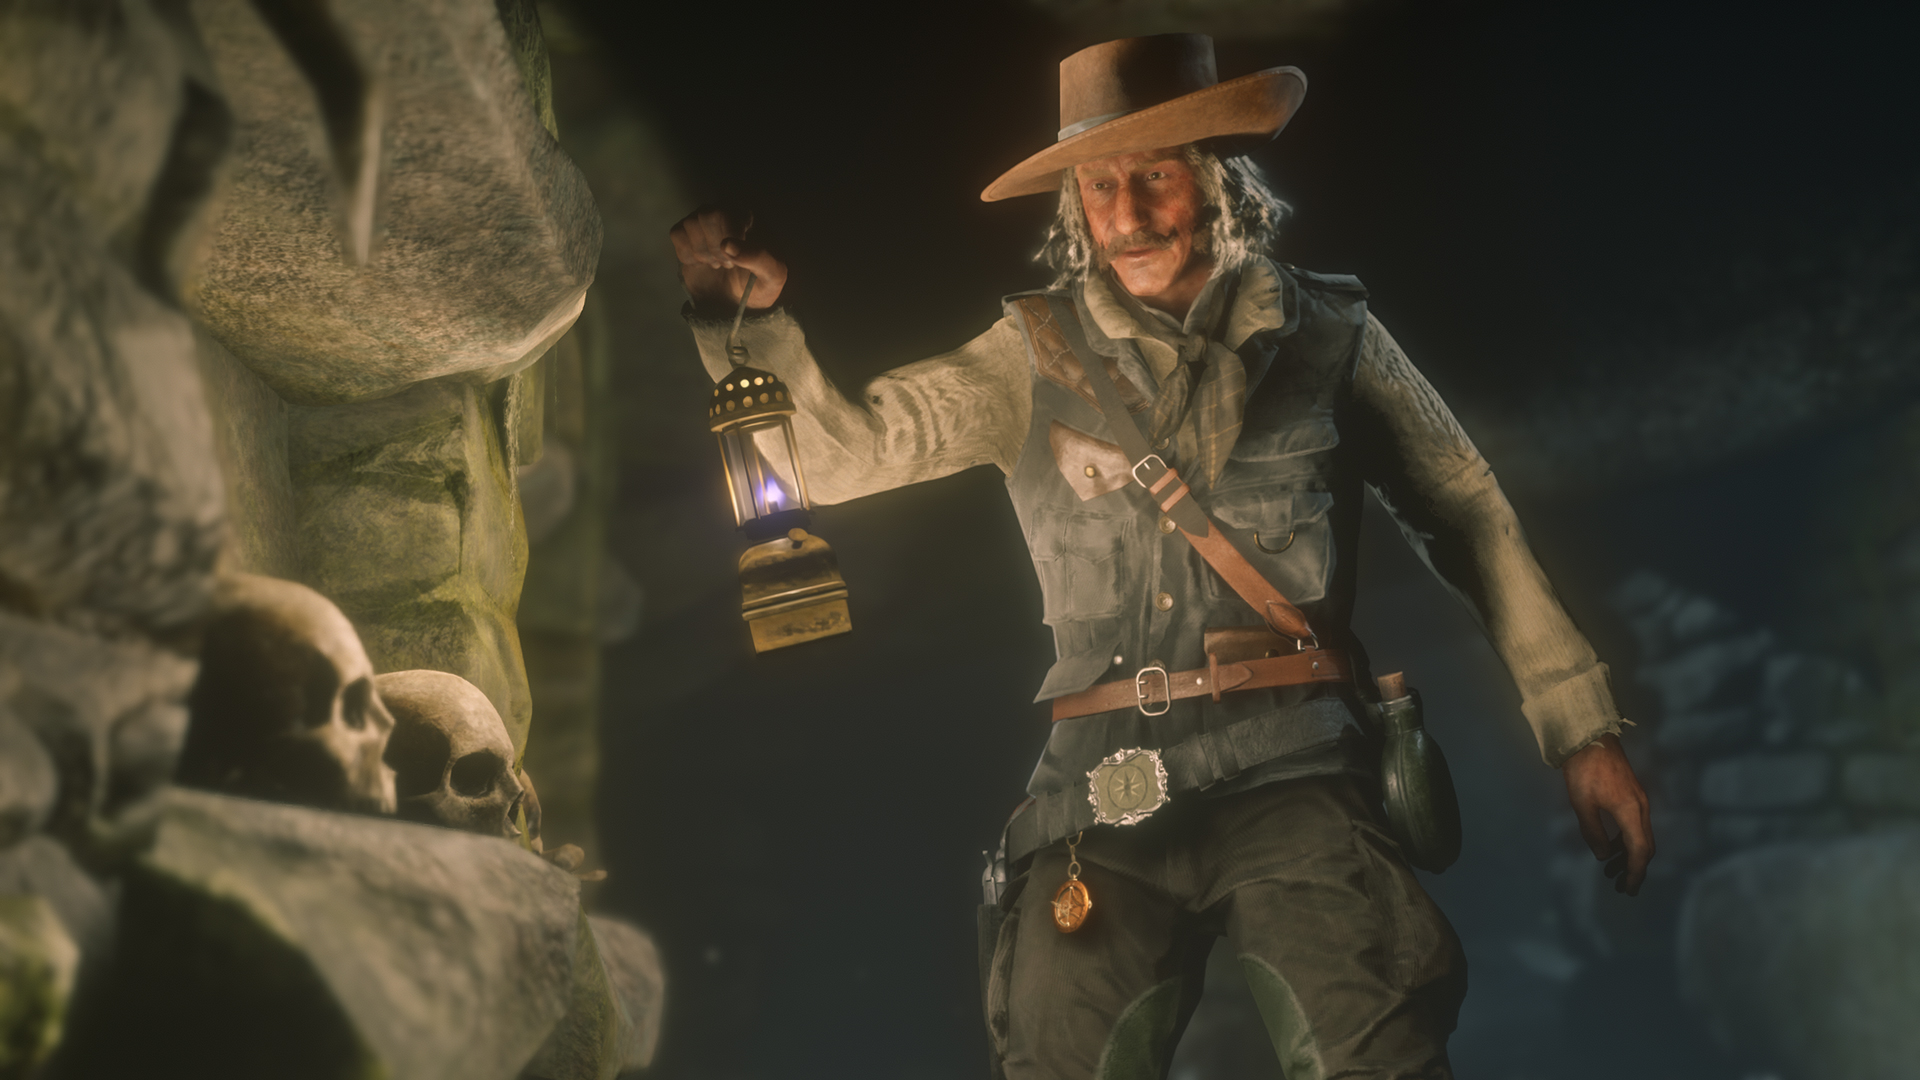 Red Dead Redemption 2' PC Release Date Revealed: Pre-Order Bonuses, New Story & Online